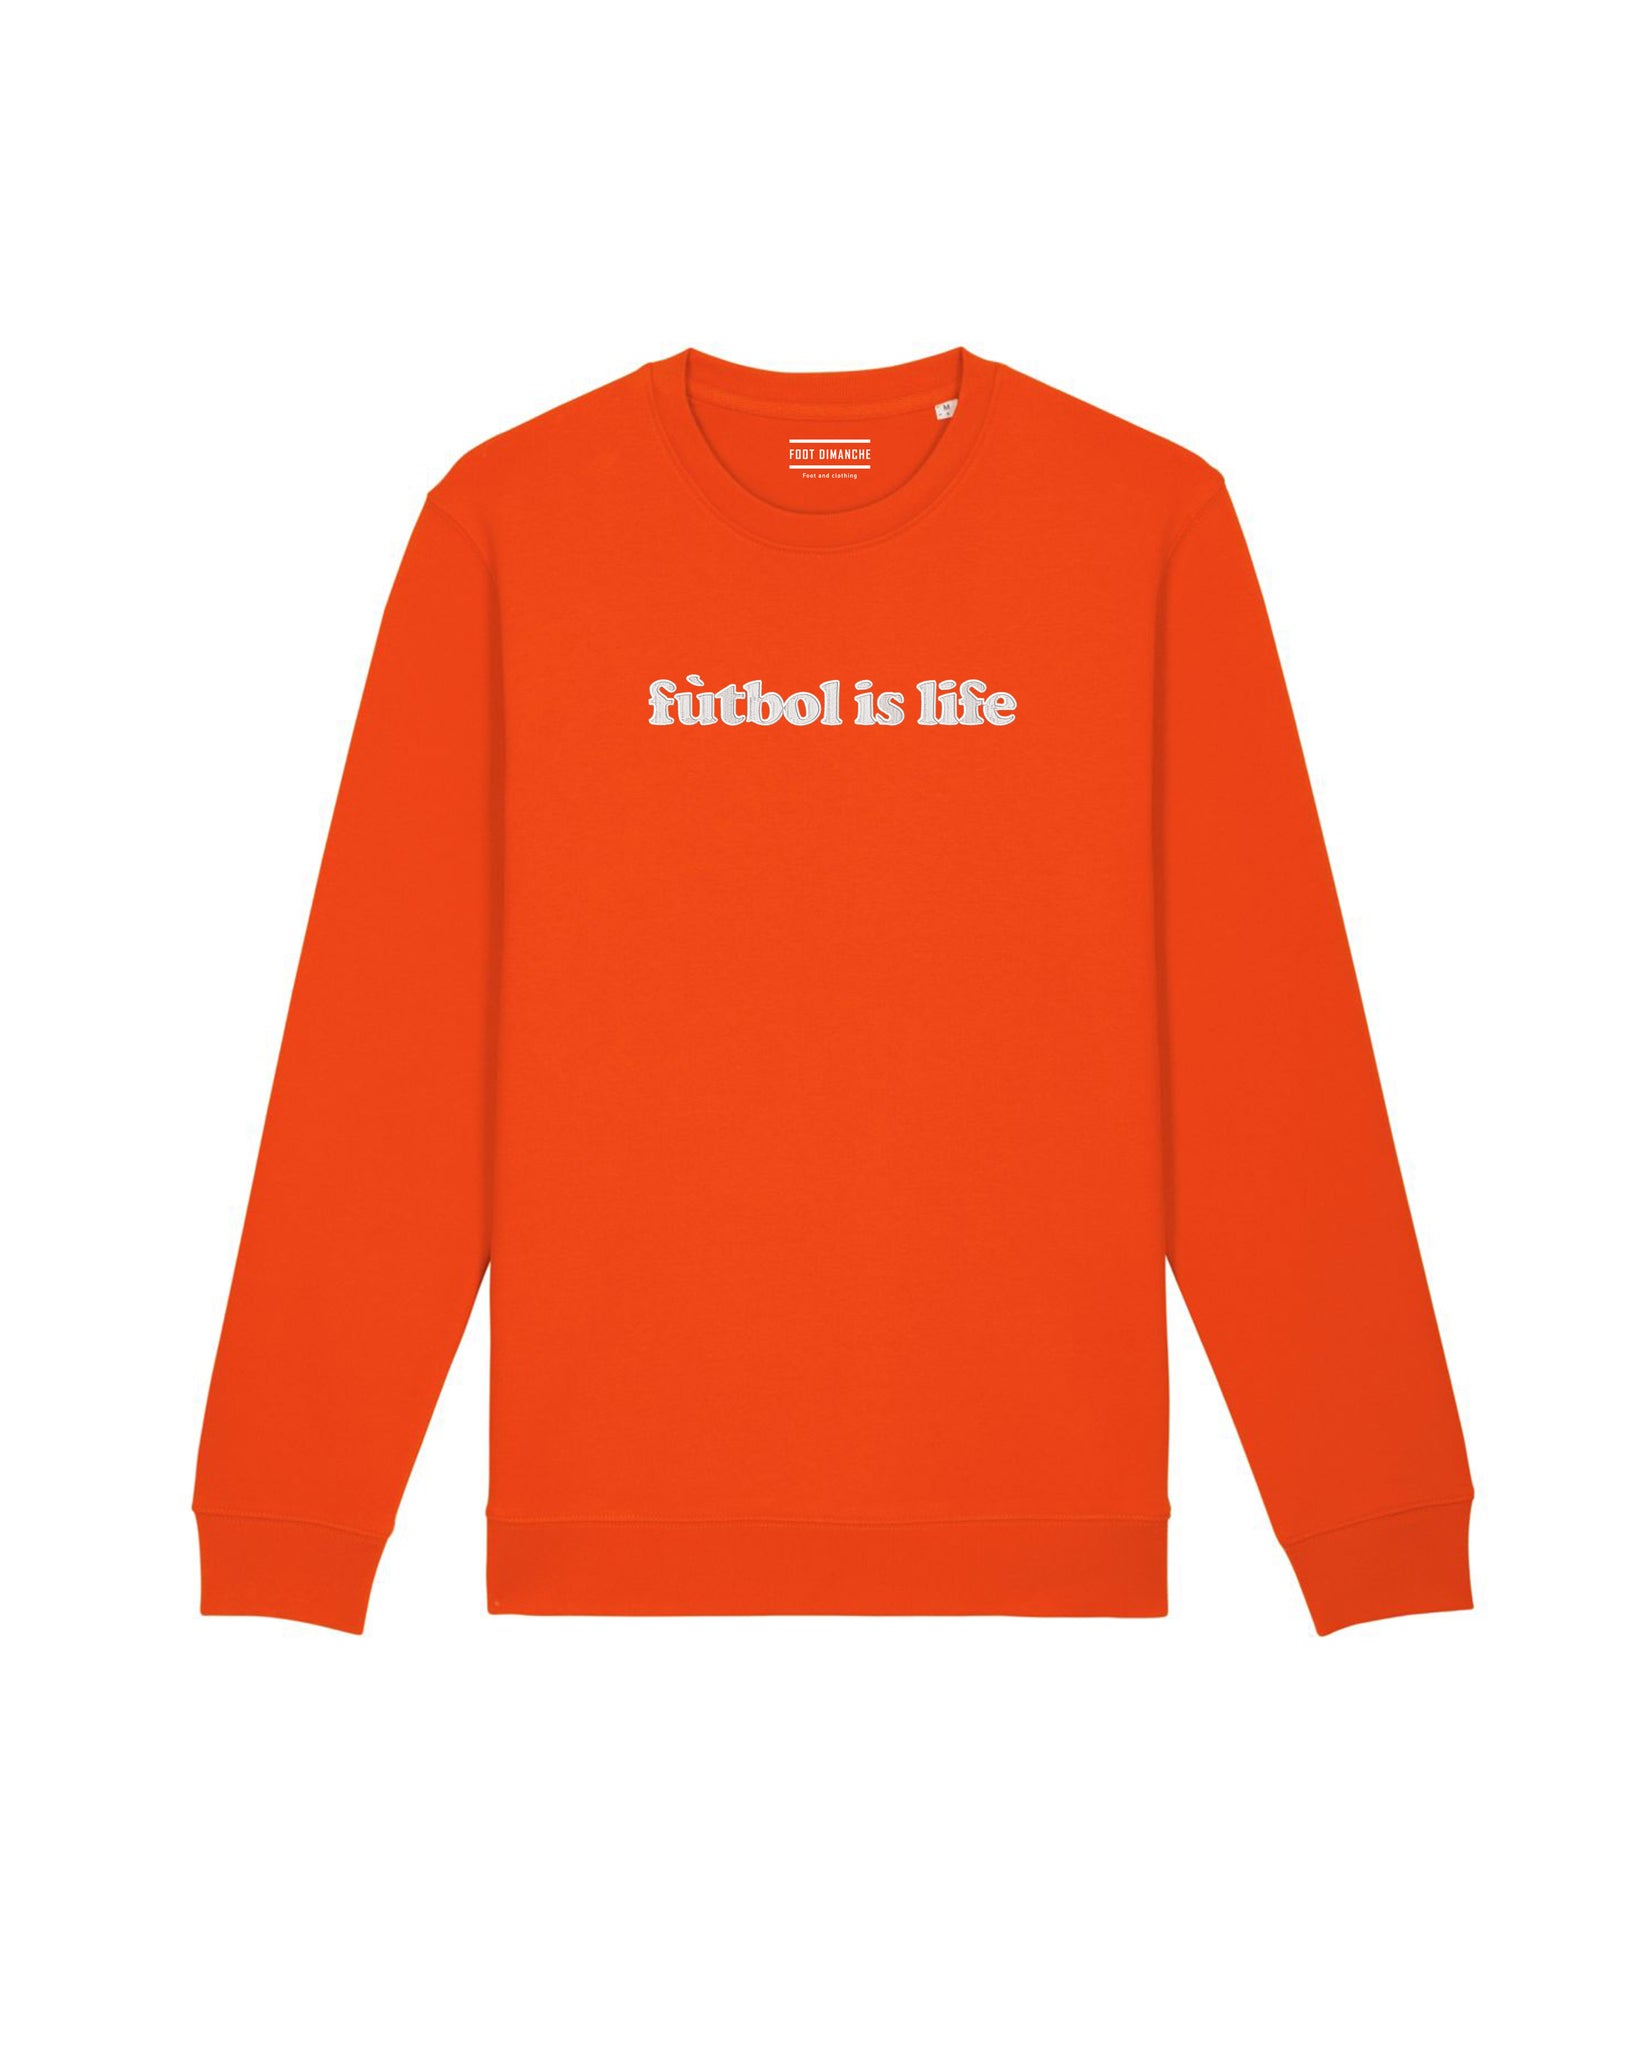 Sweat fútbol is life Ted Lasso - Foot Dimanche